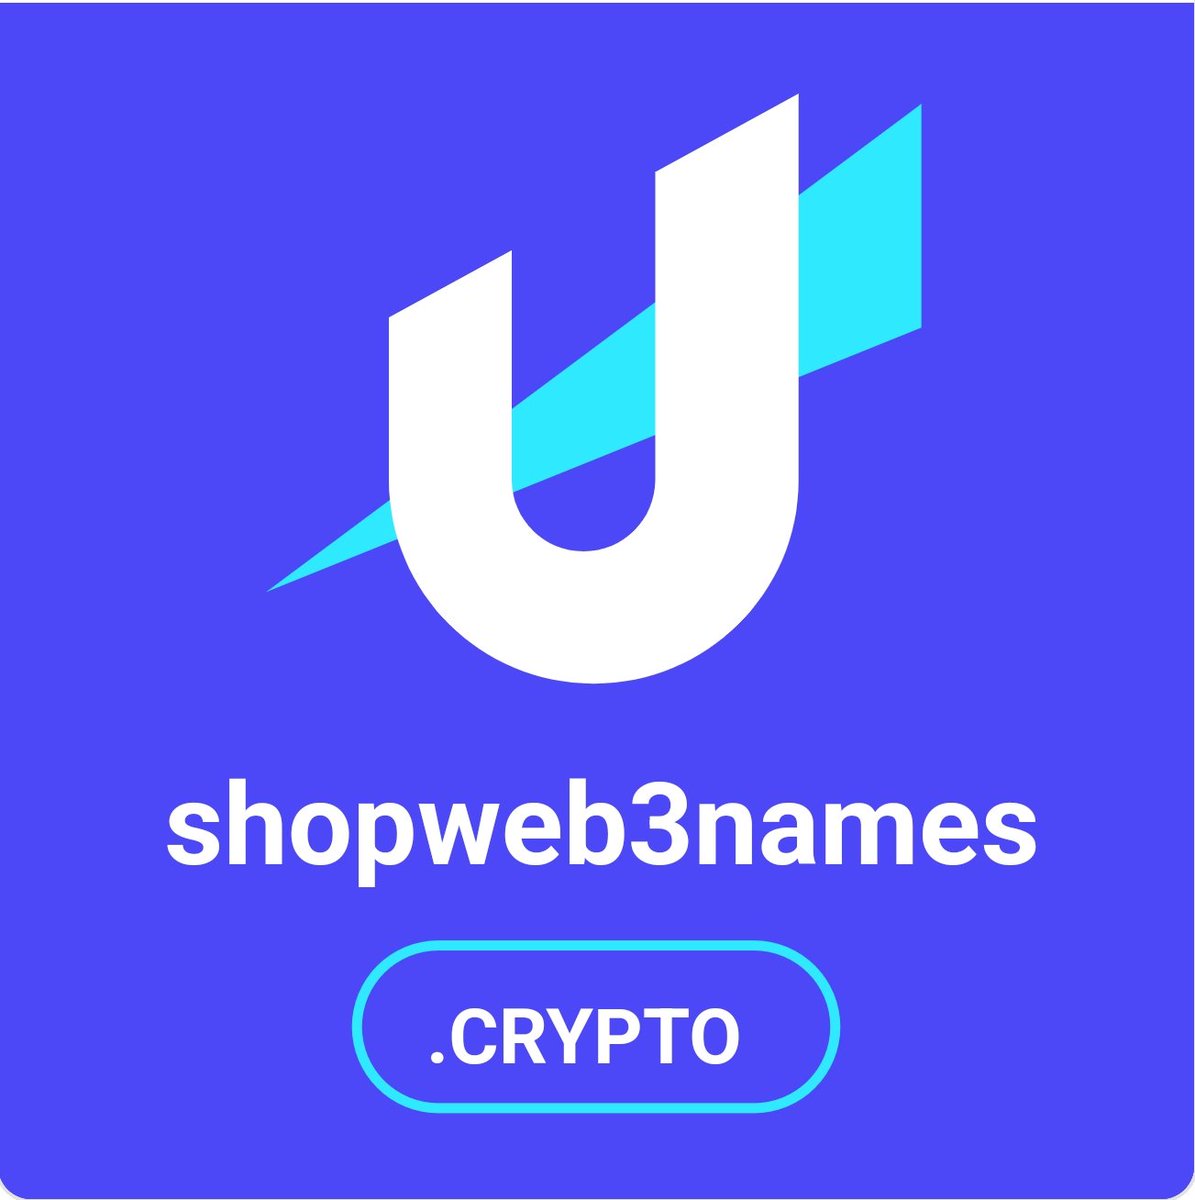 Just registered my first ENS domain on @unstoppableweb 🔥 shopweb3names.eth! It's was eazy!!! And I also registered ensnames.crytpo, buyweb3domains.polygon, shopweb3names.crypto and more!!!!!! LFG!!!!!???? #Unstoppabledomains #ens #web3 #domains #nfts #crypto #nft #ensvision